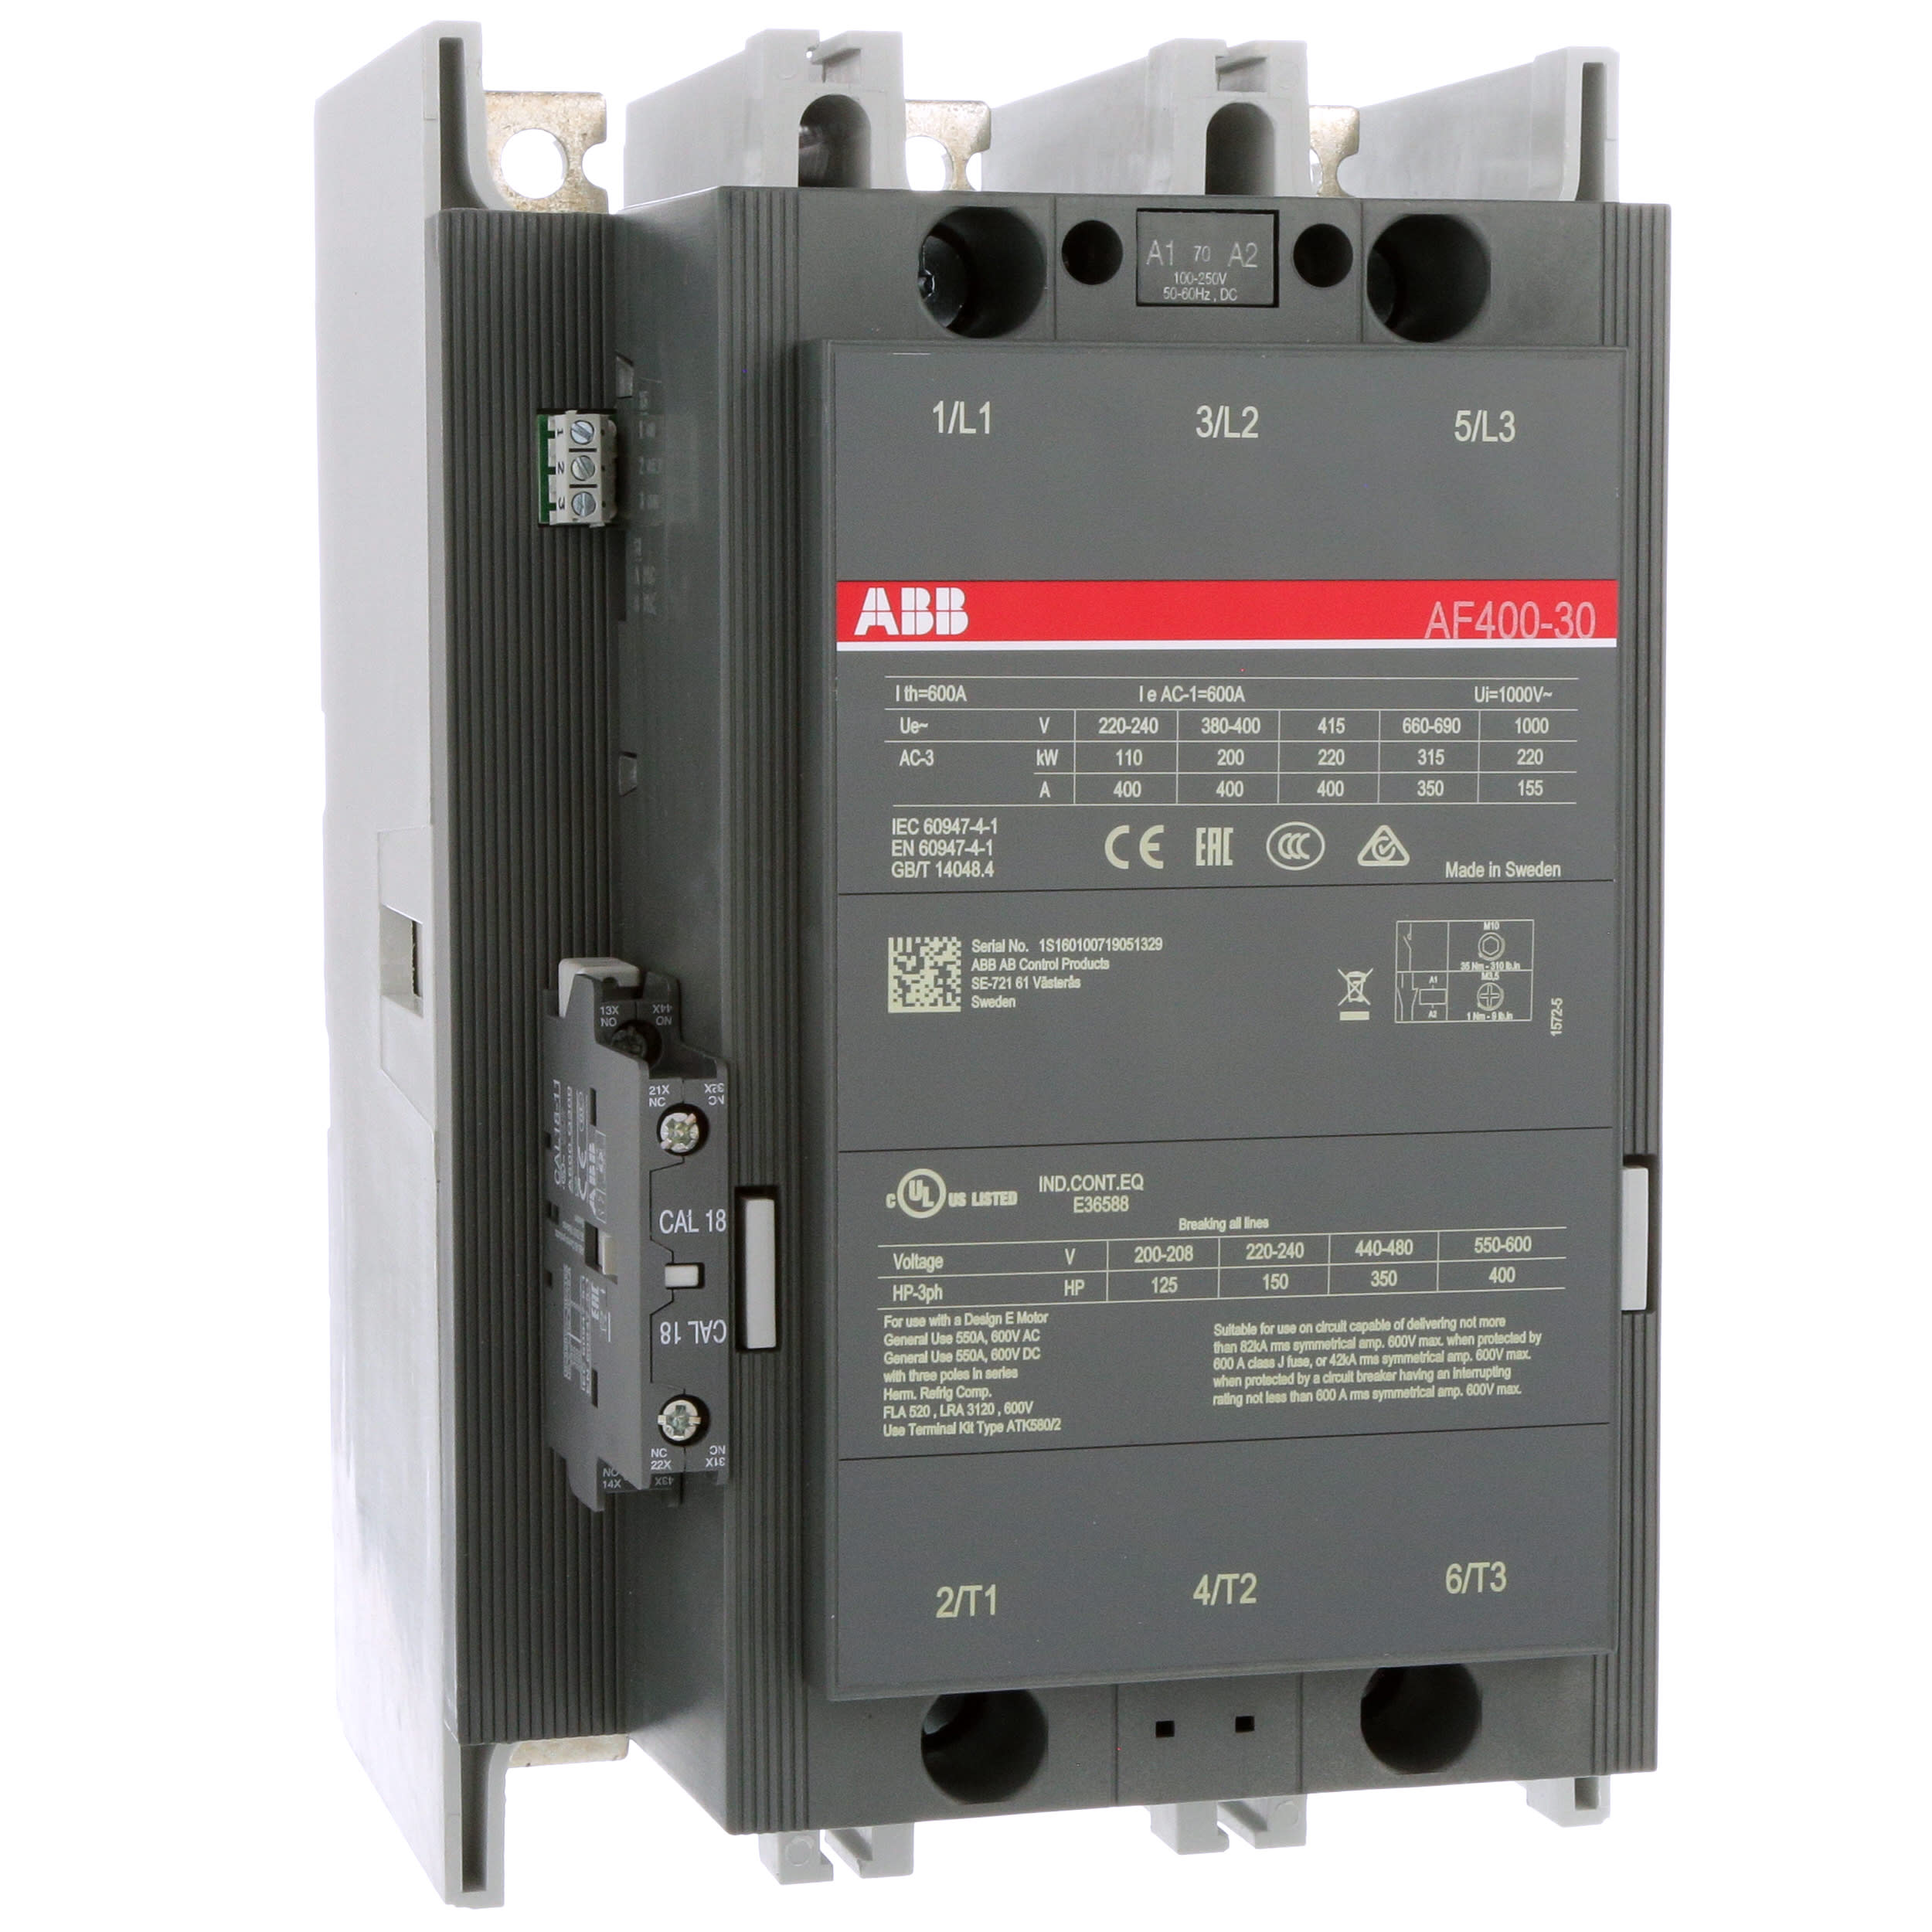 Details about   ABB Contactor AF30-30-00-11 New Open Box 